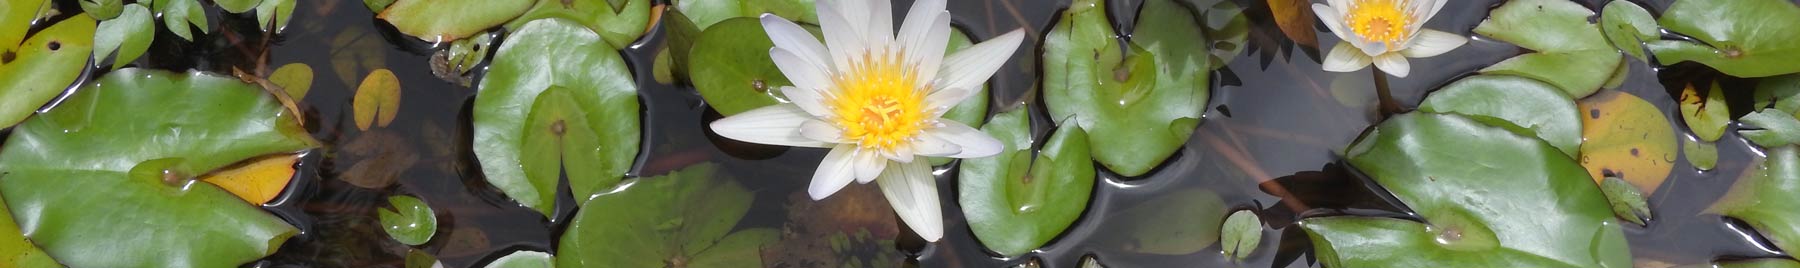 White waterlilies floating on a pond